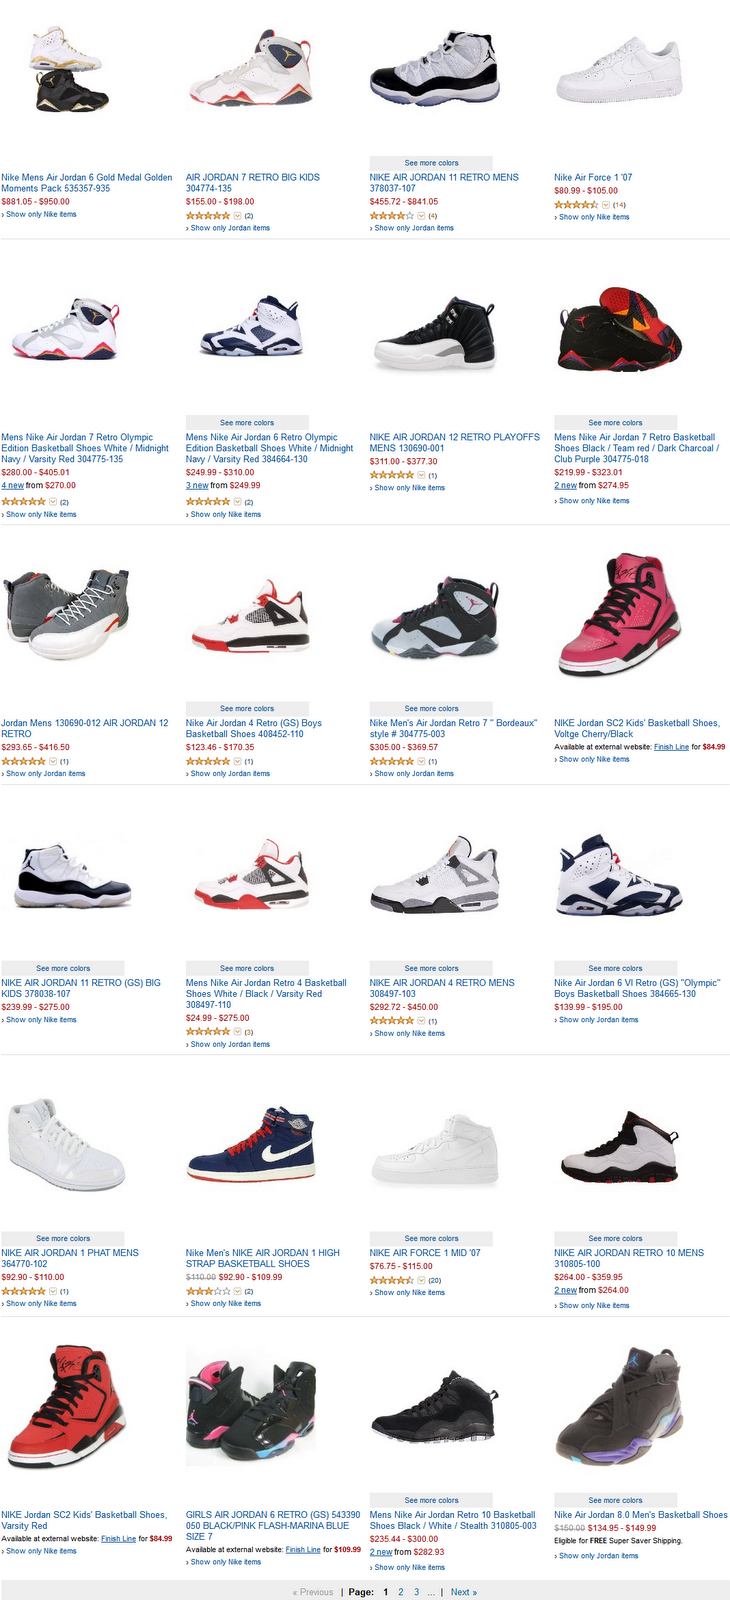 Review cheap air jordan shoes new and discount price | View My Blog News